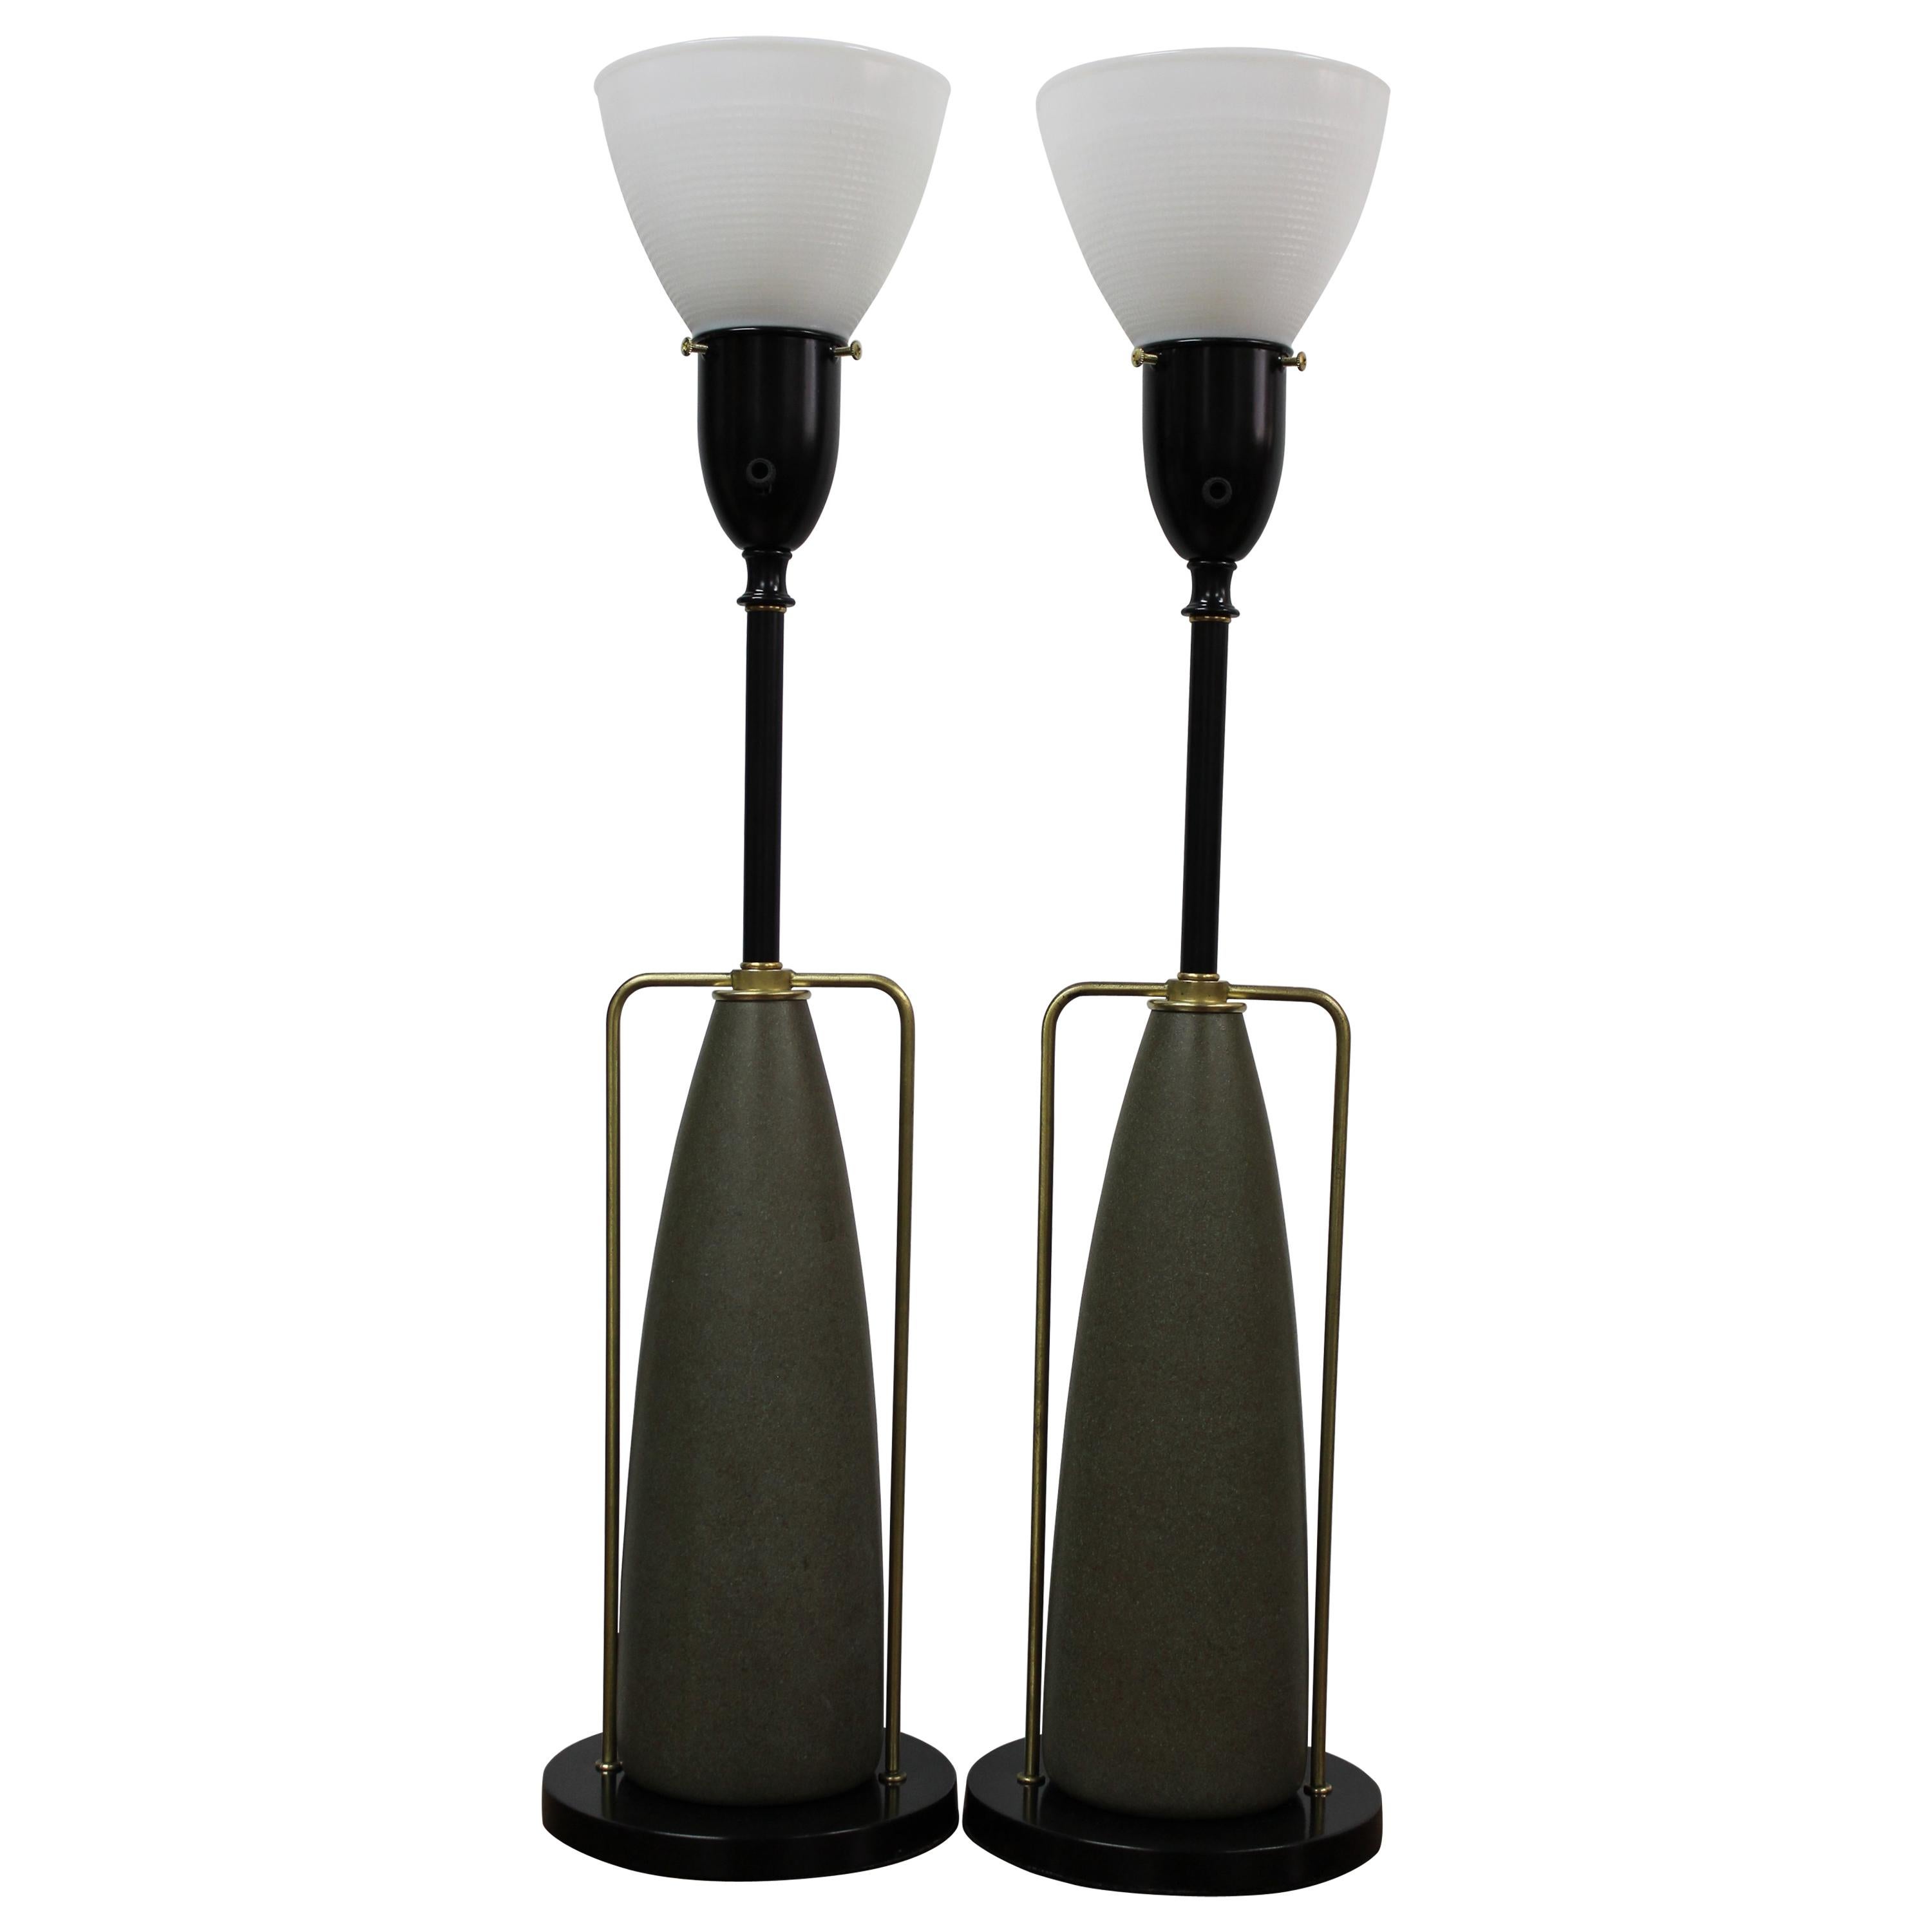 Pair of Table Lamps by Rembrandt Lamp Company